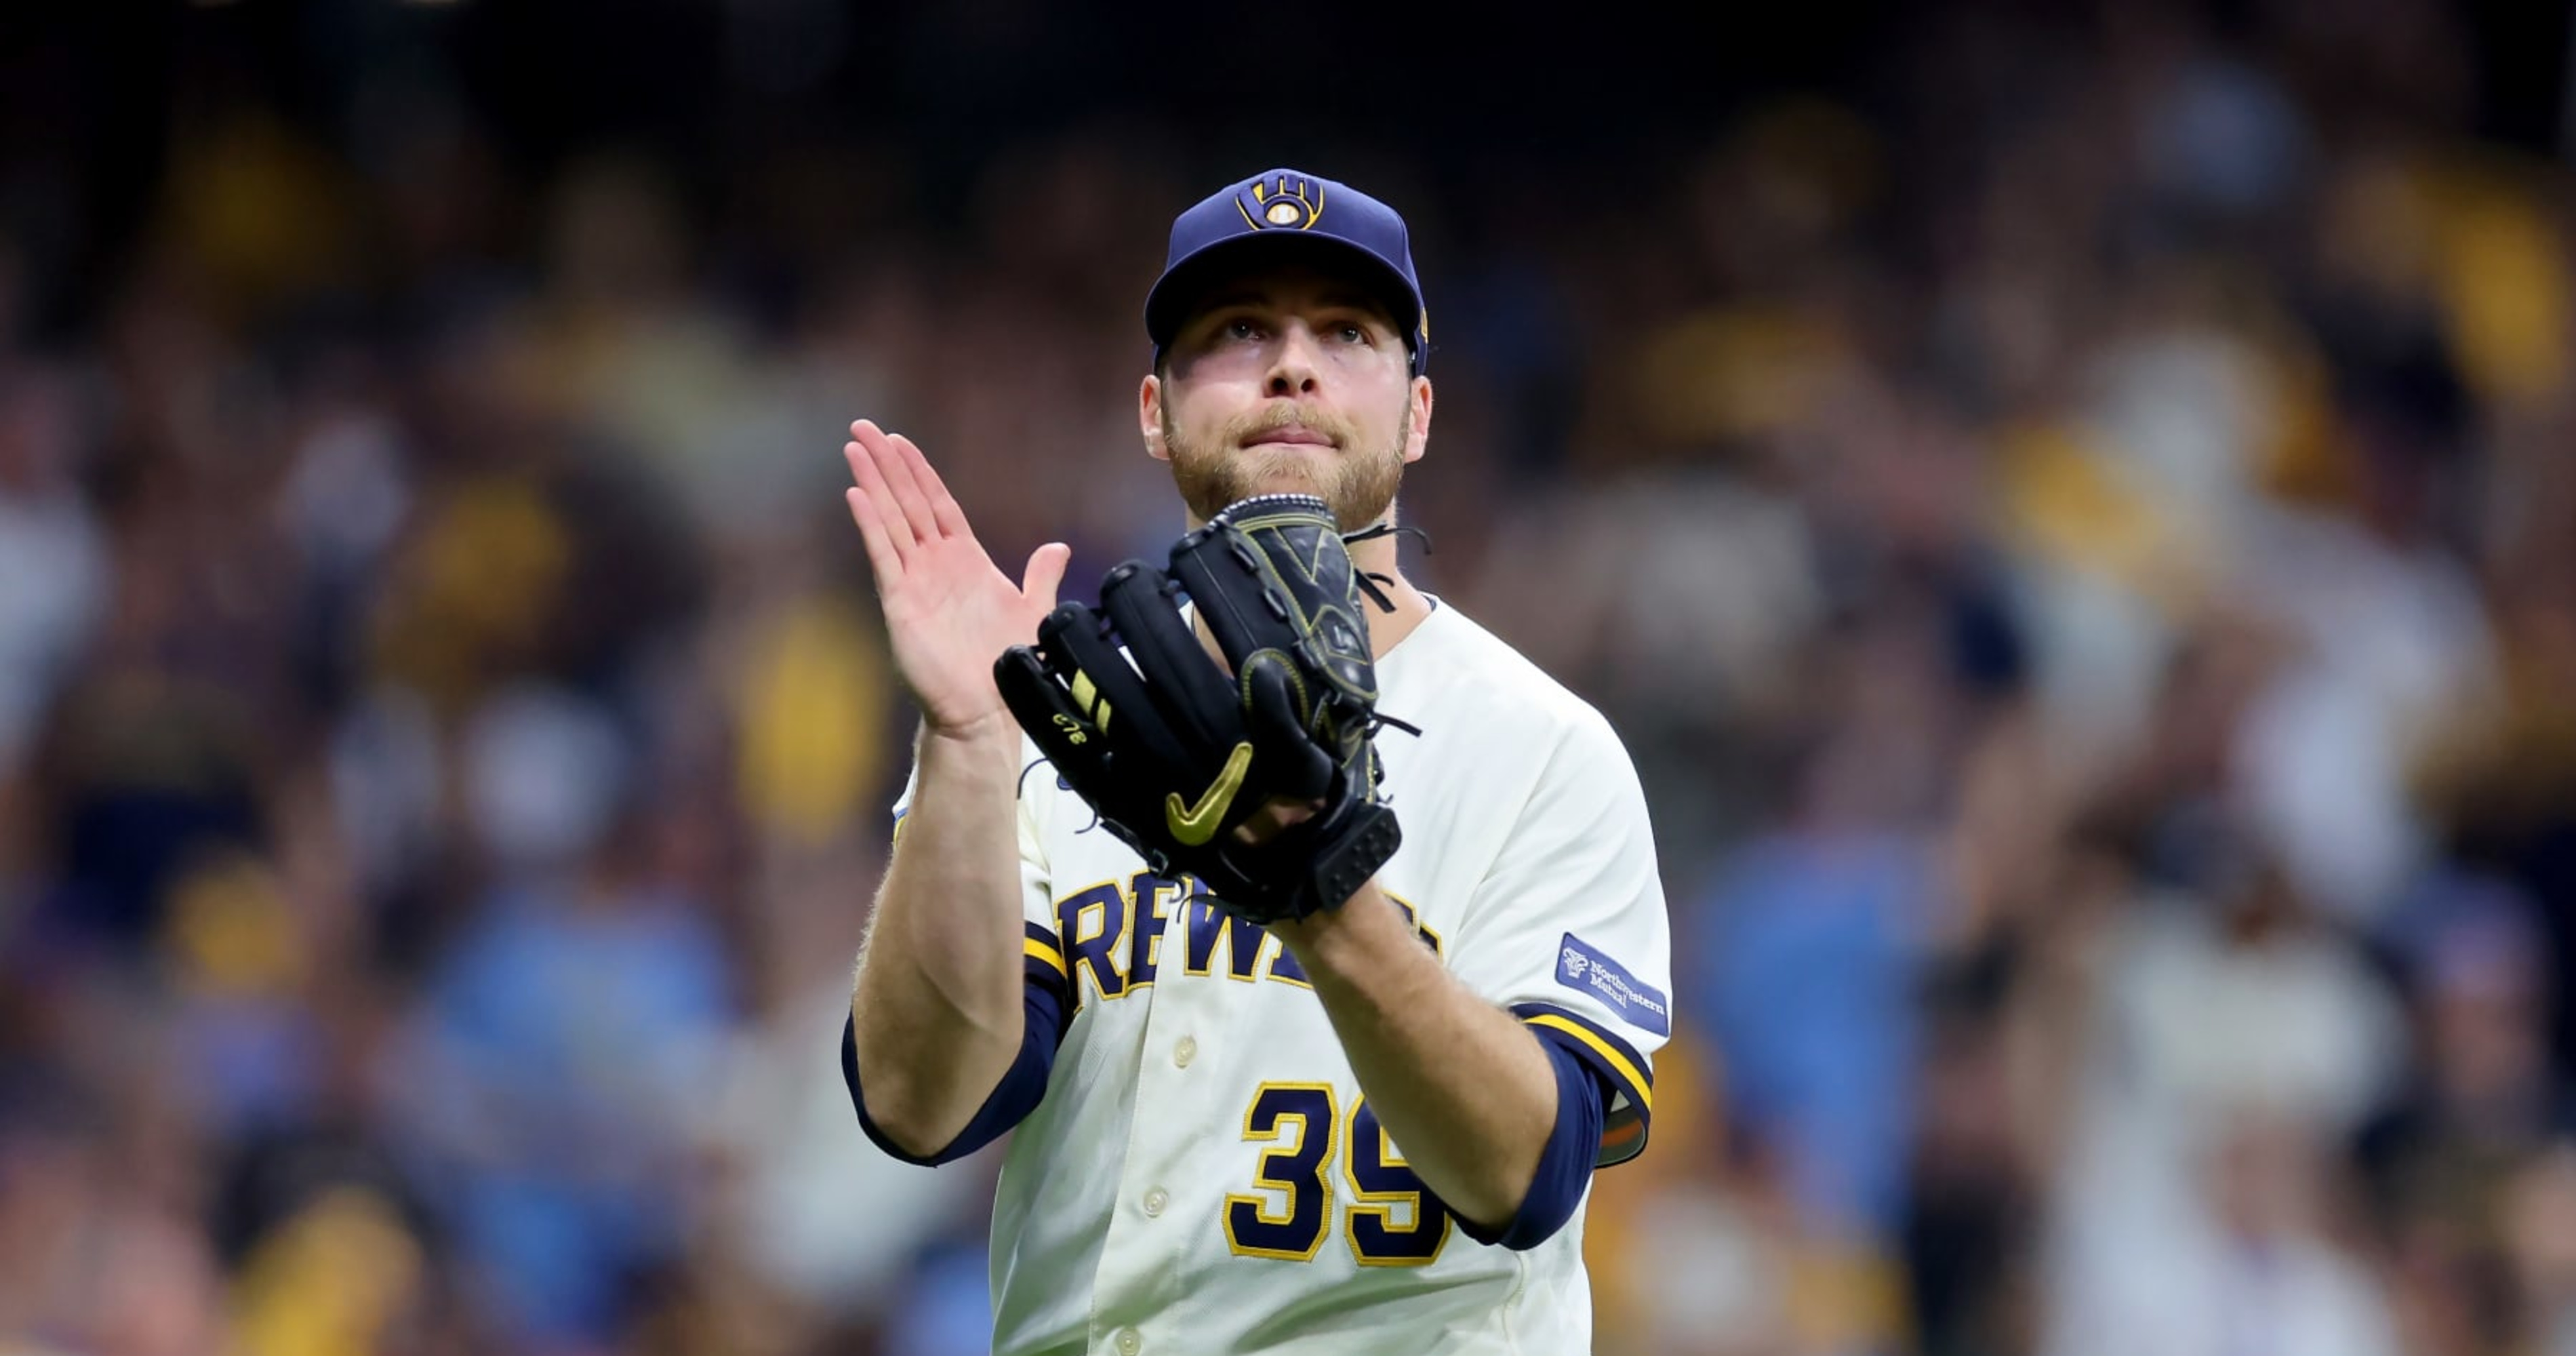 Is Now the Right Time to Trade Corbin Burnes? - Brewers - Brewer